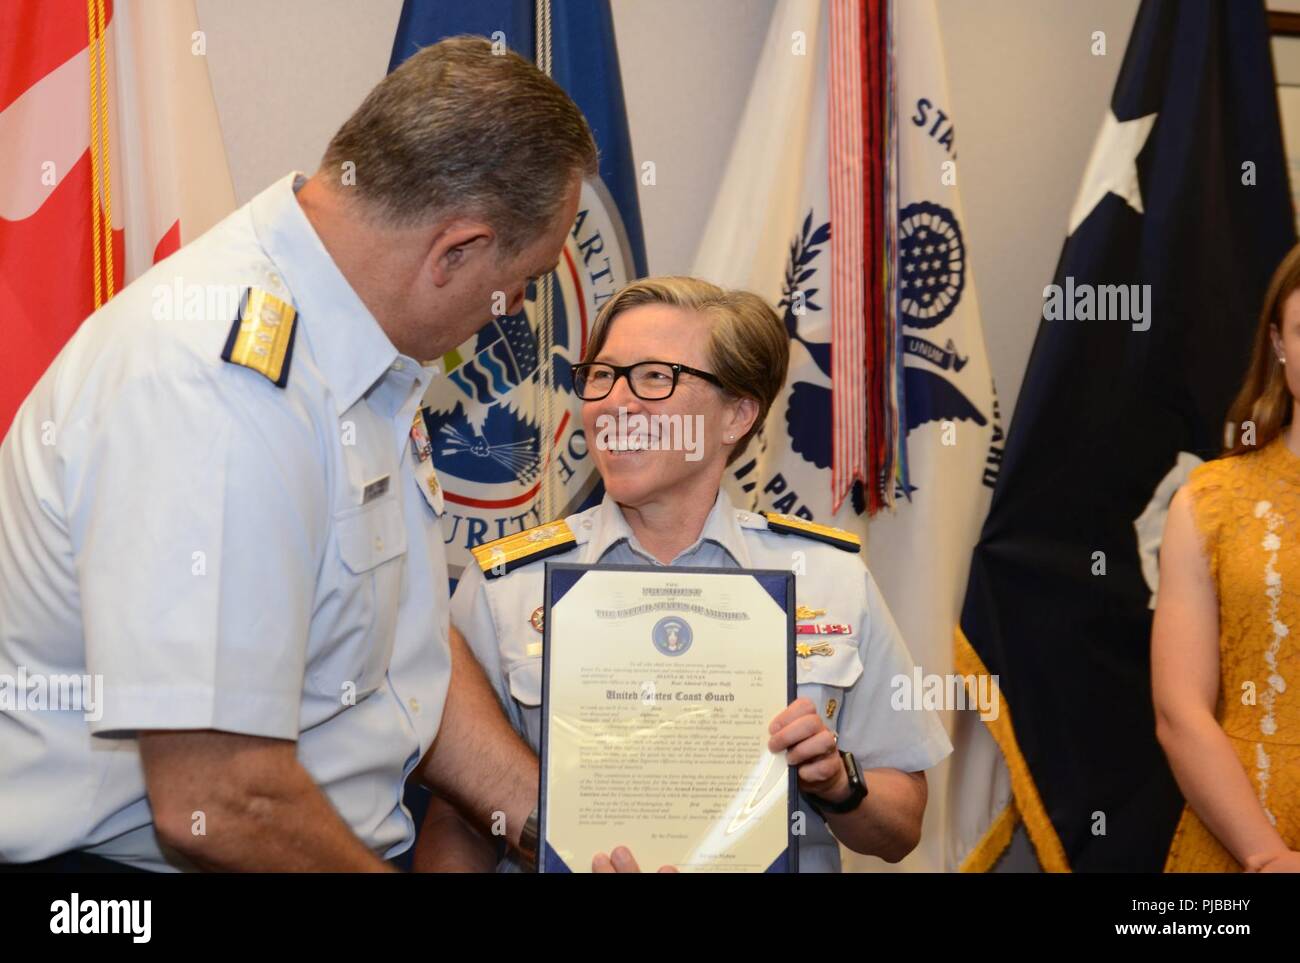 Rear Adm. Joanna Nunan, the Ninth District Commander, smiles as retired Rear Adm. Mike Parks, former Ninth District Commander presents her promotion certificate July 3, 2018 in Cleveland. Nunan was promoted from Rear Adm. Lower Half to Rear Adm. Upper Half. Stock Photo